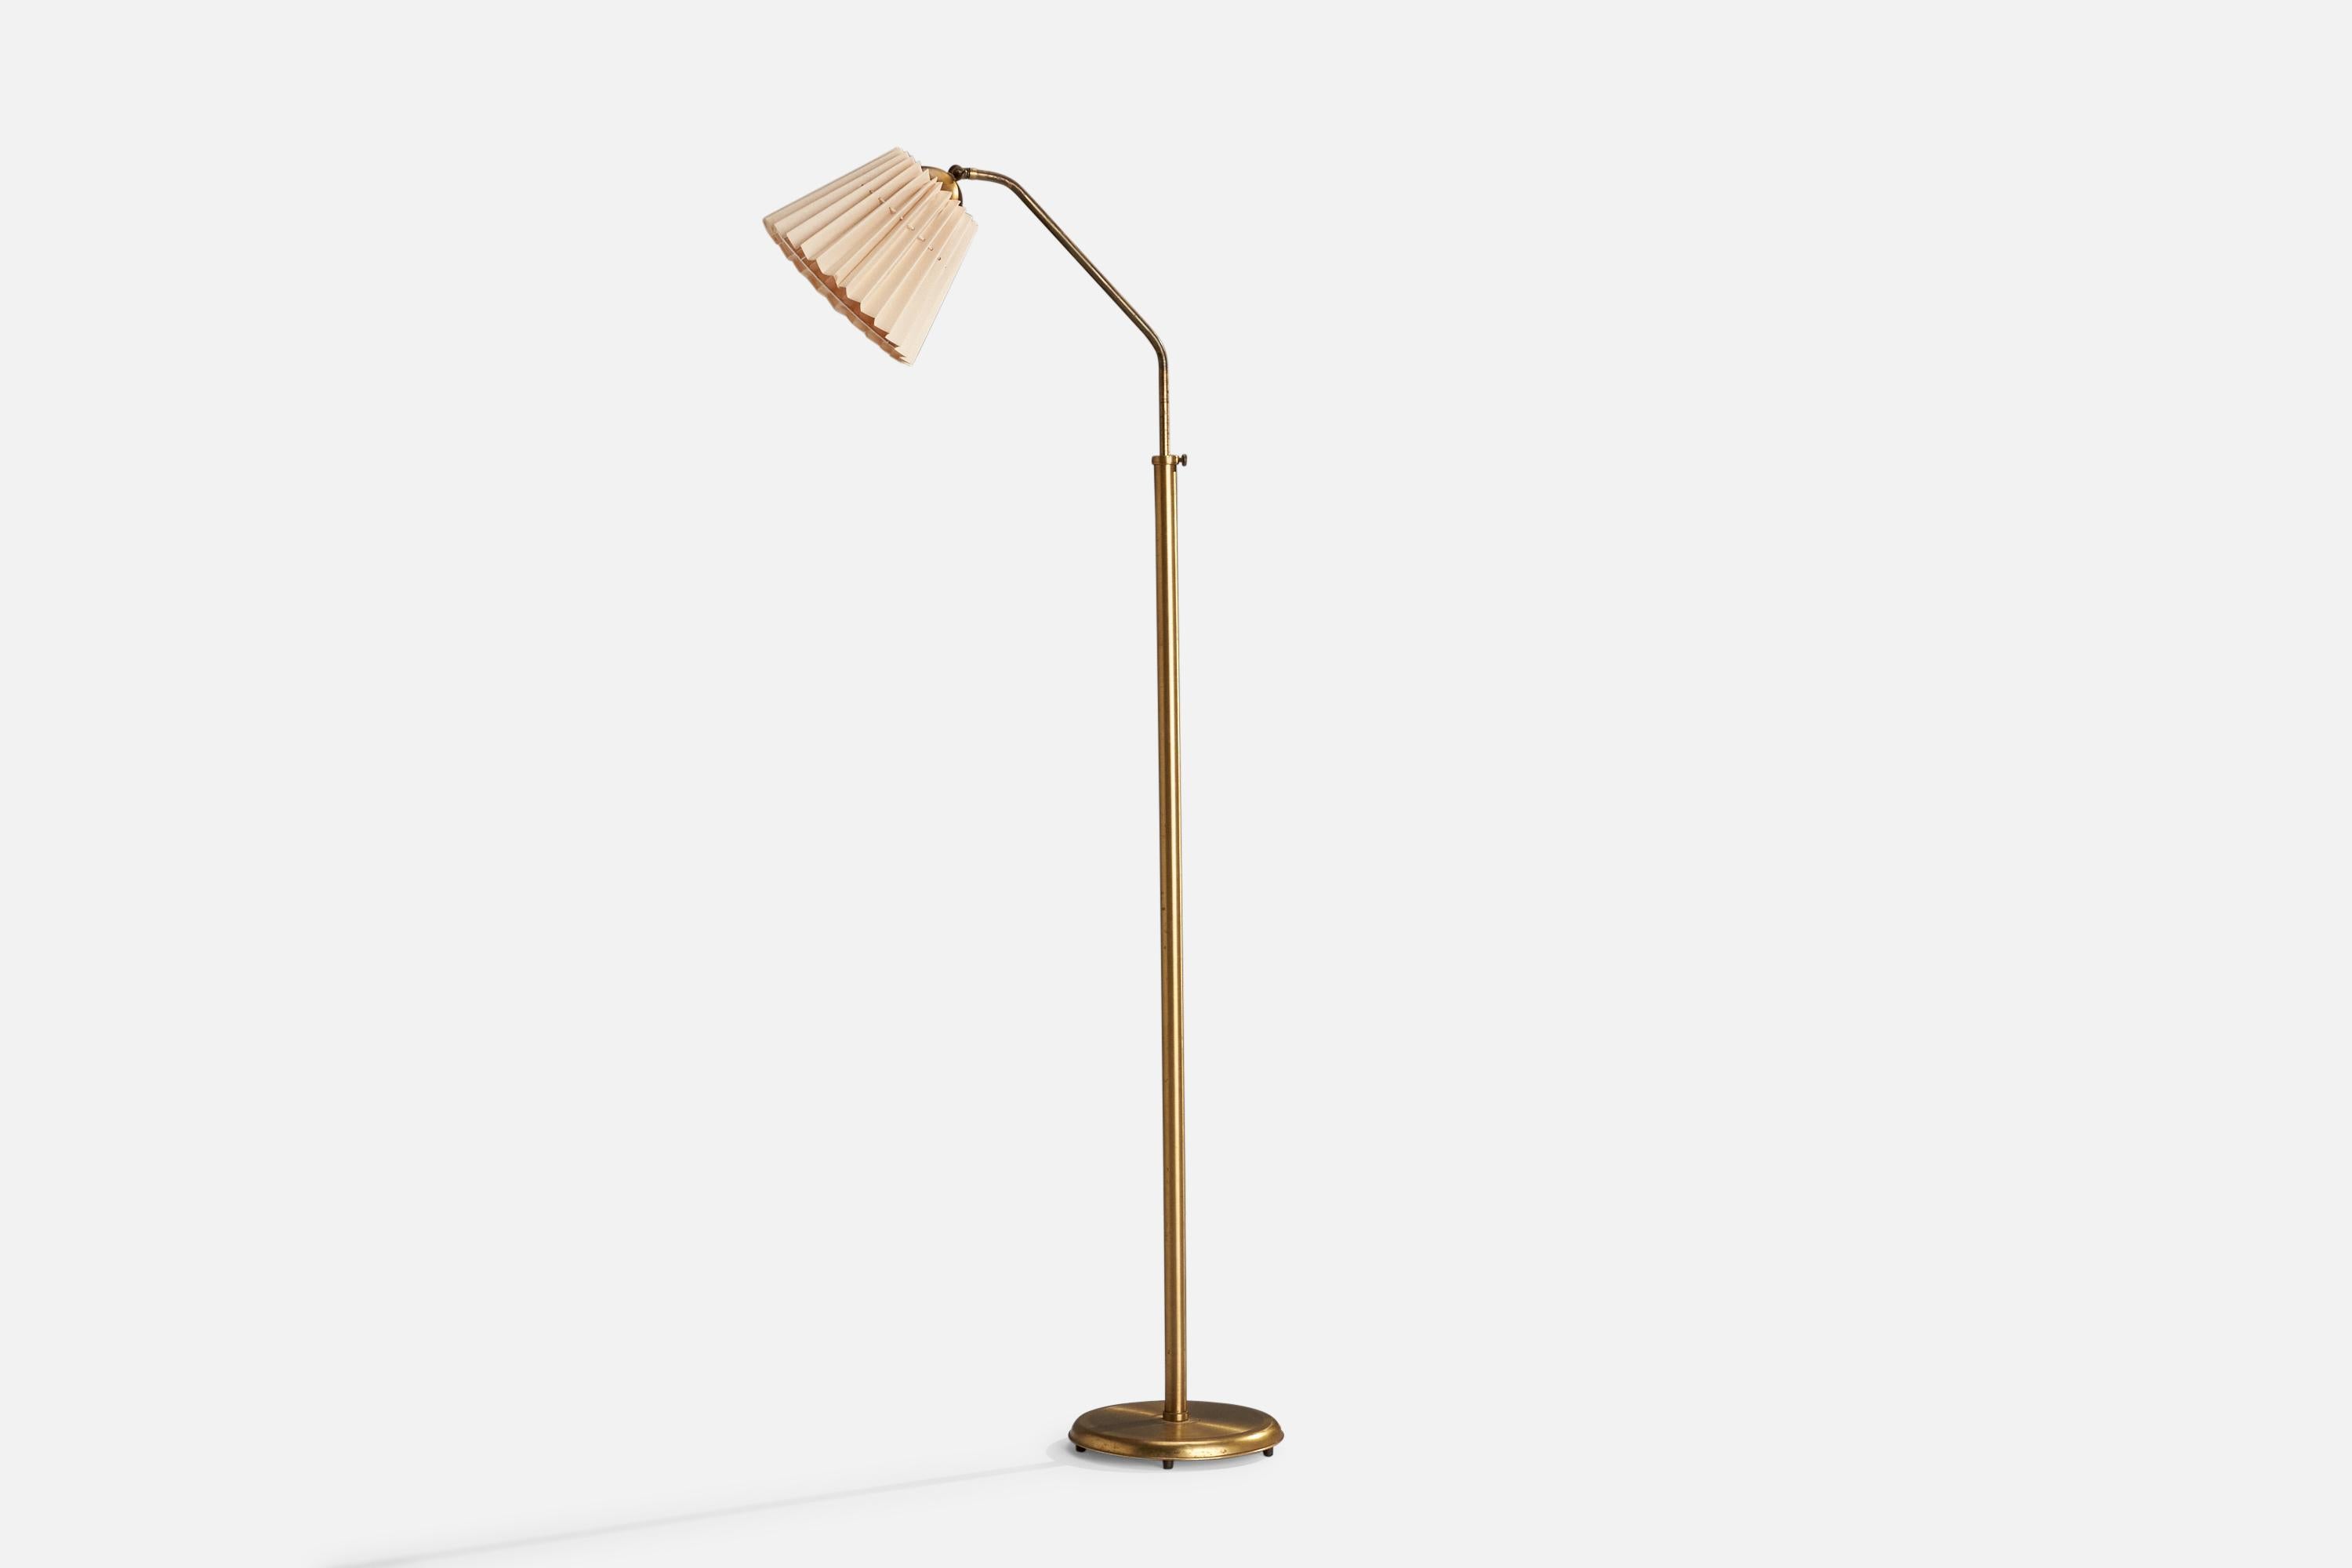 An adjustable brass and light pink fabric floor lamp designed and produced in Sweden, c. 1940s.

Dimensions variable 
Overall Dimensions (inches): 60.25” H x 9.5” W x 24.5@” D
Stated dimensions include shade.
Bulb Specifications: E-26 Bulb
Number of